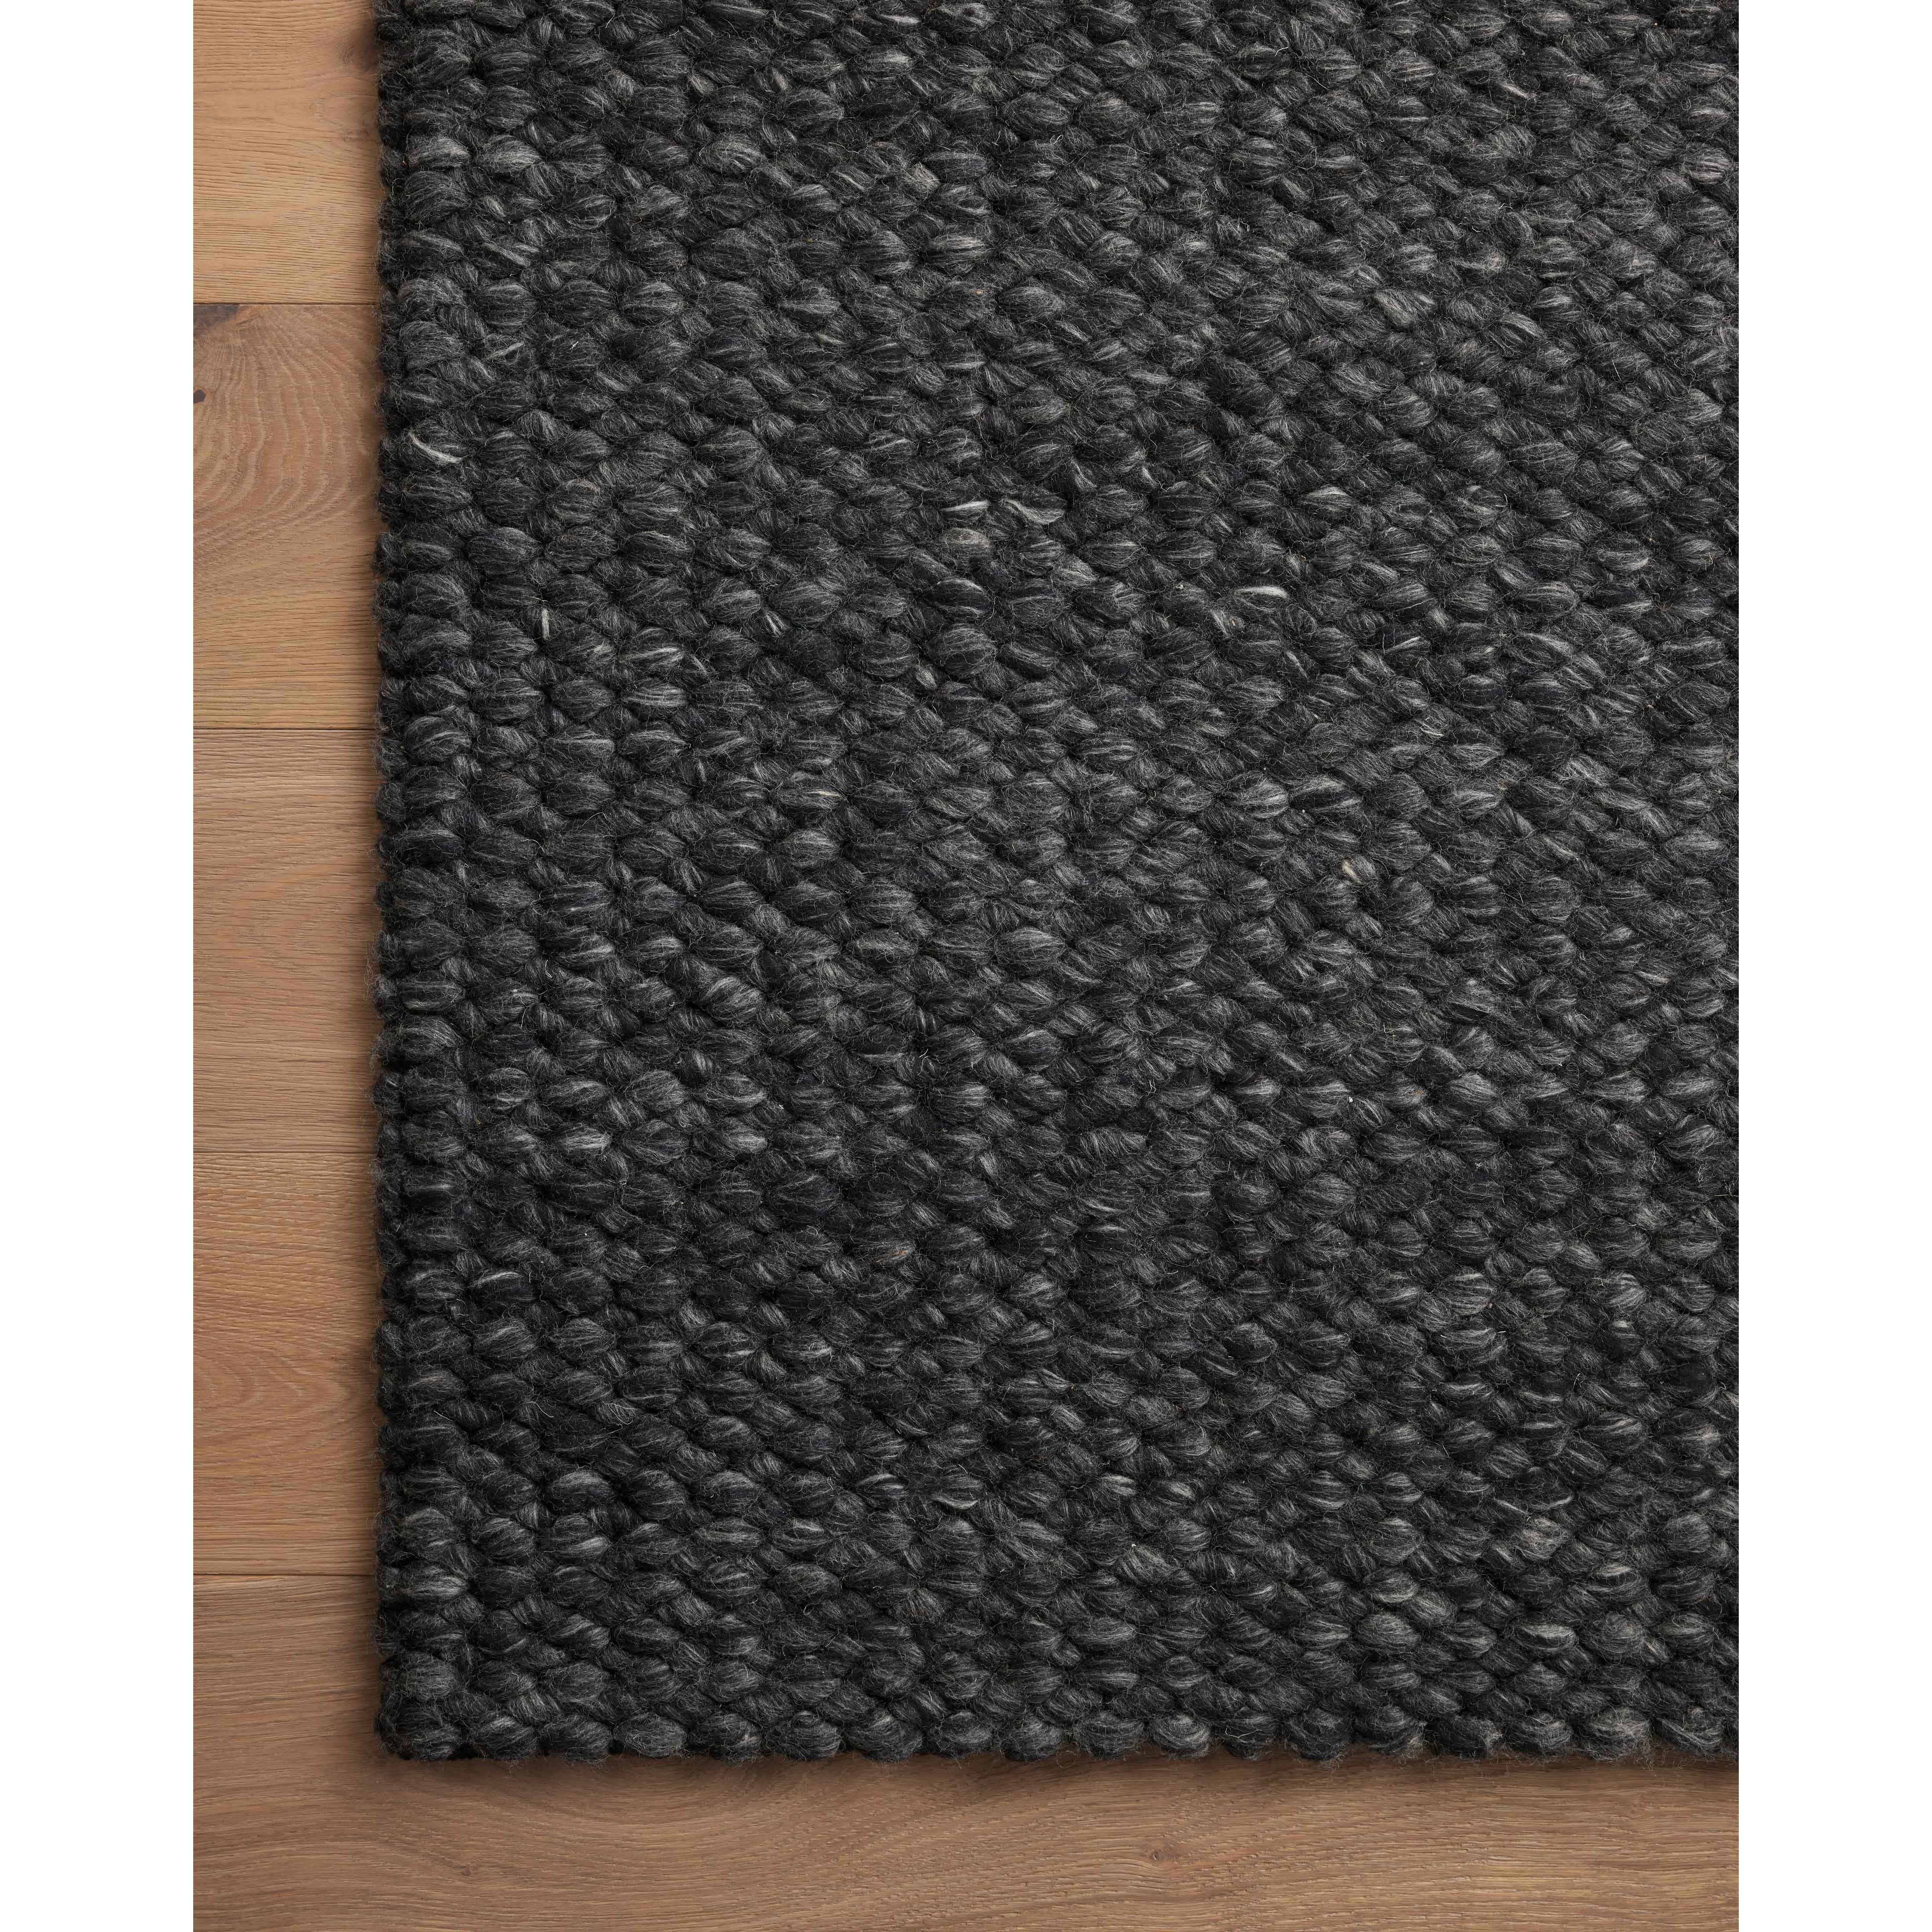 The Hendrick Charcoal Rug is a beautifully textured wool area rug with an elevated ease reminiscent of a cozy handmade sweater. The rug is very plush underfoot, making it equally welcome in bedrooms and living rooms. The hand-woven weave pattern adds dimension while the rug’s color palette is soft, neutral, and serene. Amethyst Home provides interior design, new construction, custom furniture, and area rugs in the Houston metro area.